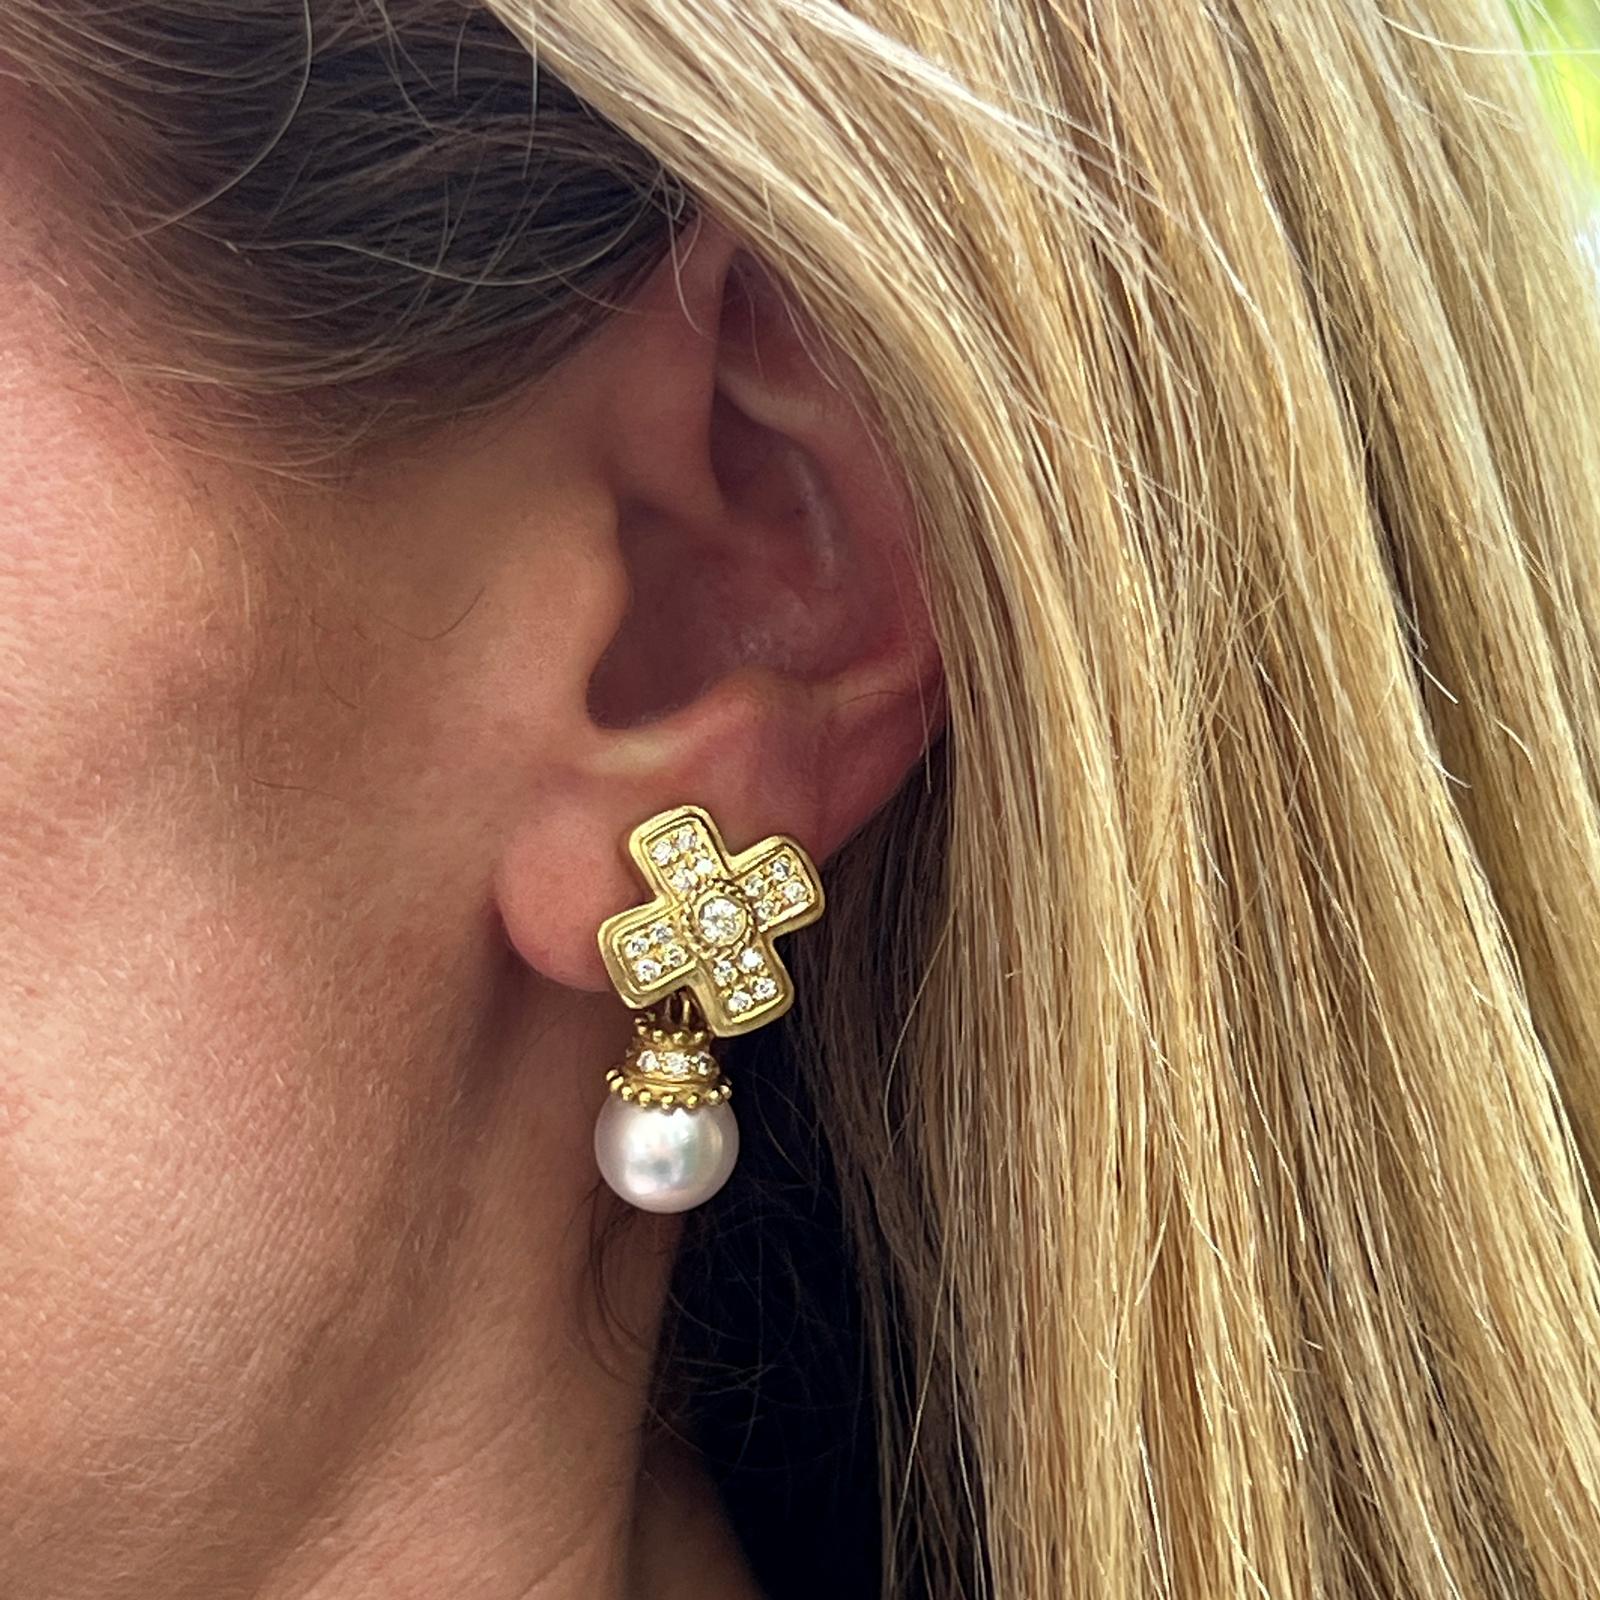 Diamond and pearl earrings by designer Doris Panos fashioned in 18 karat yellow gold. The earrings feature 46 round brilliant cut diamonds weighing approximately 1.00 CTW and graded G-H color and VS clarity. The pearl drops are detachable. The